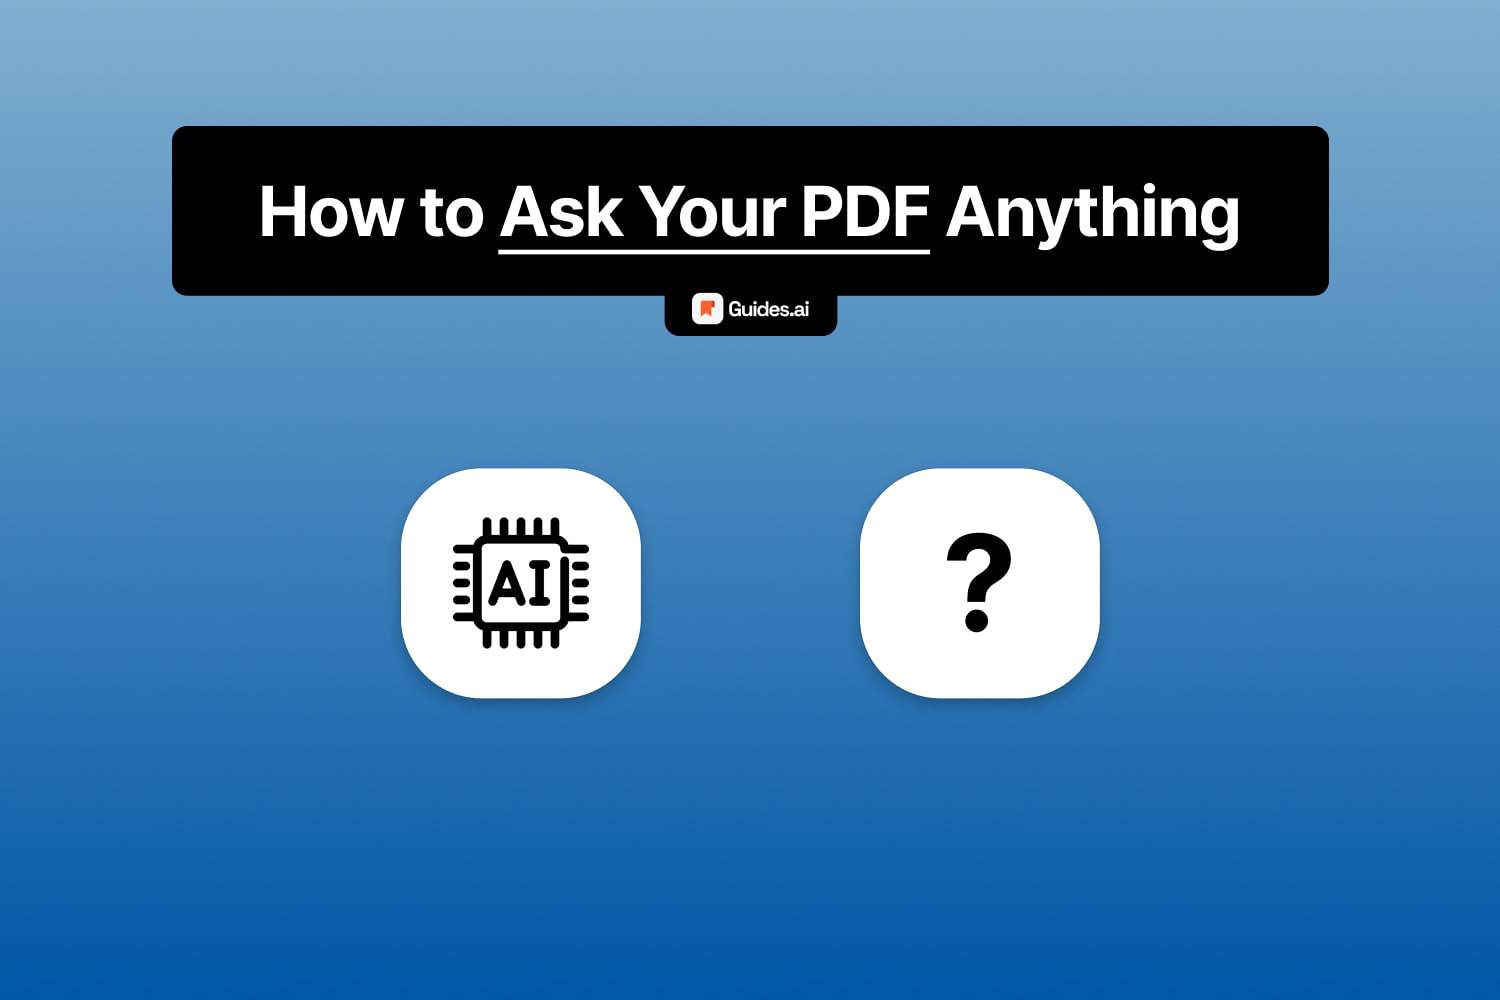 How to ask your PDF questions